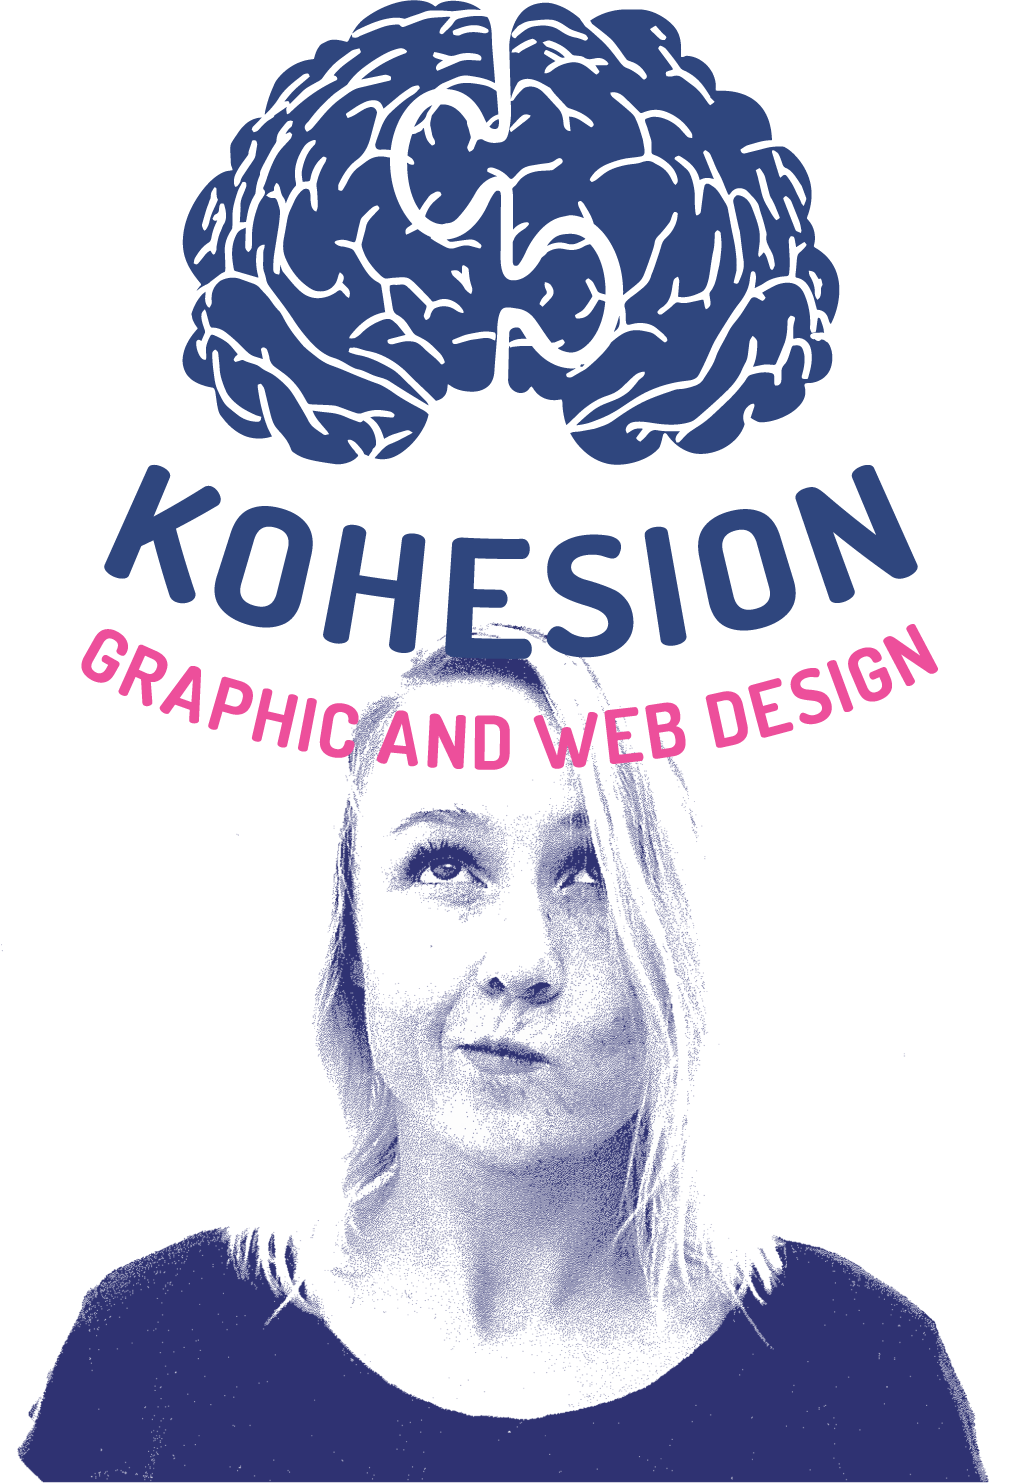 KOHESION GRAPHIC AND WEB DESIGN IN THE ADELAIDE HILLS